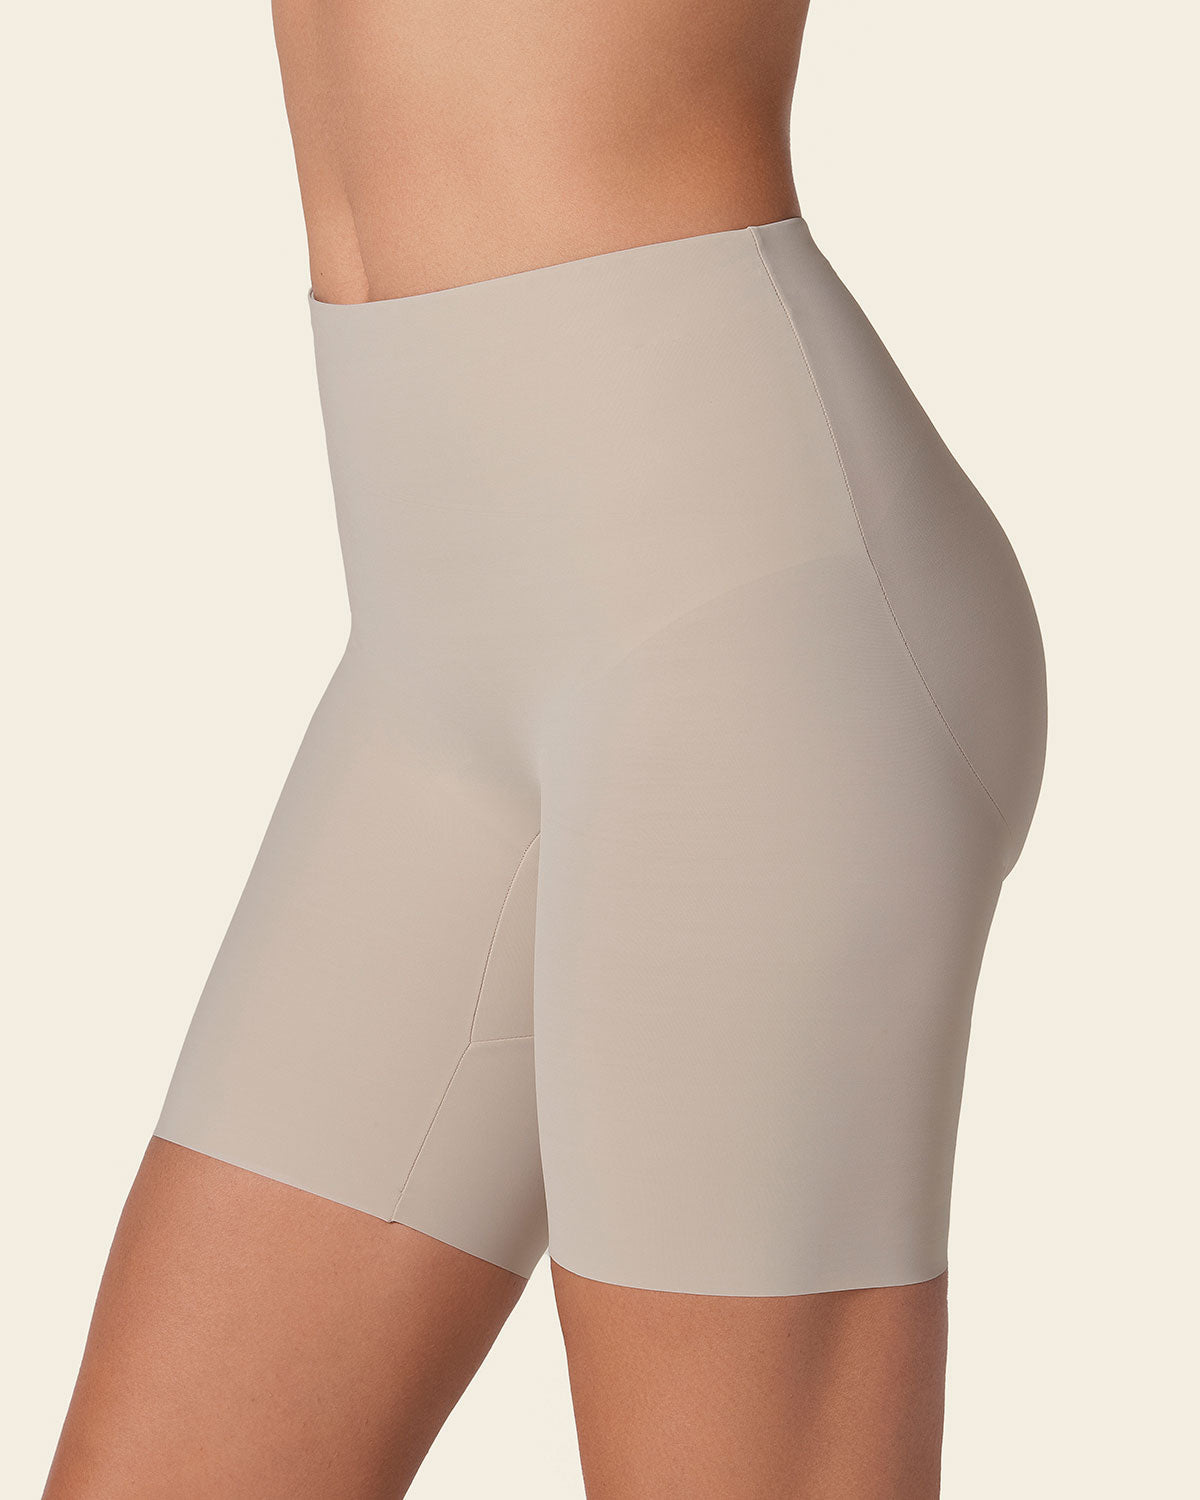 Get a Sleek Look with Shapewear Cycling Shorts, by Cycling Shop UK